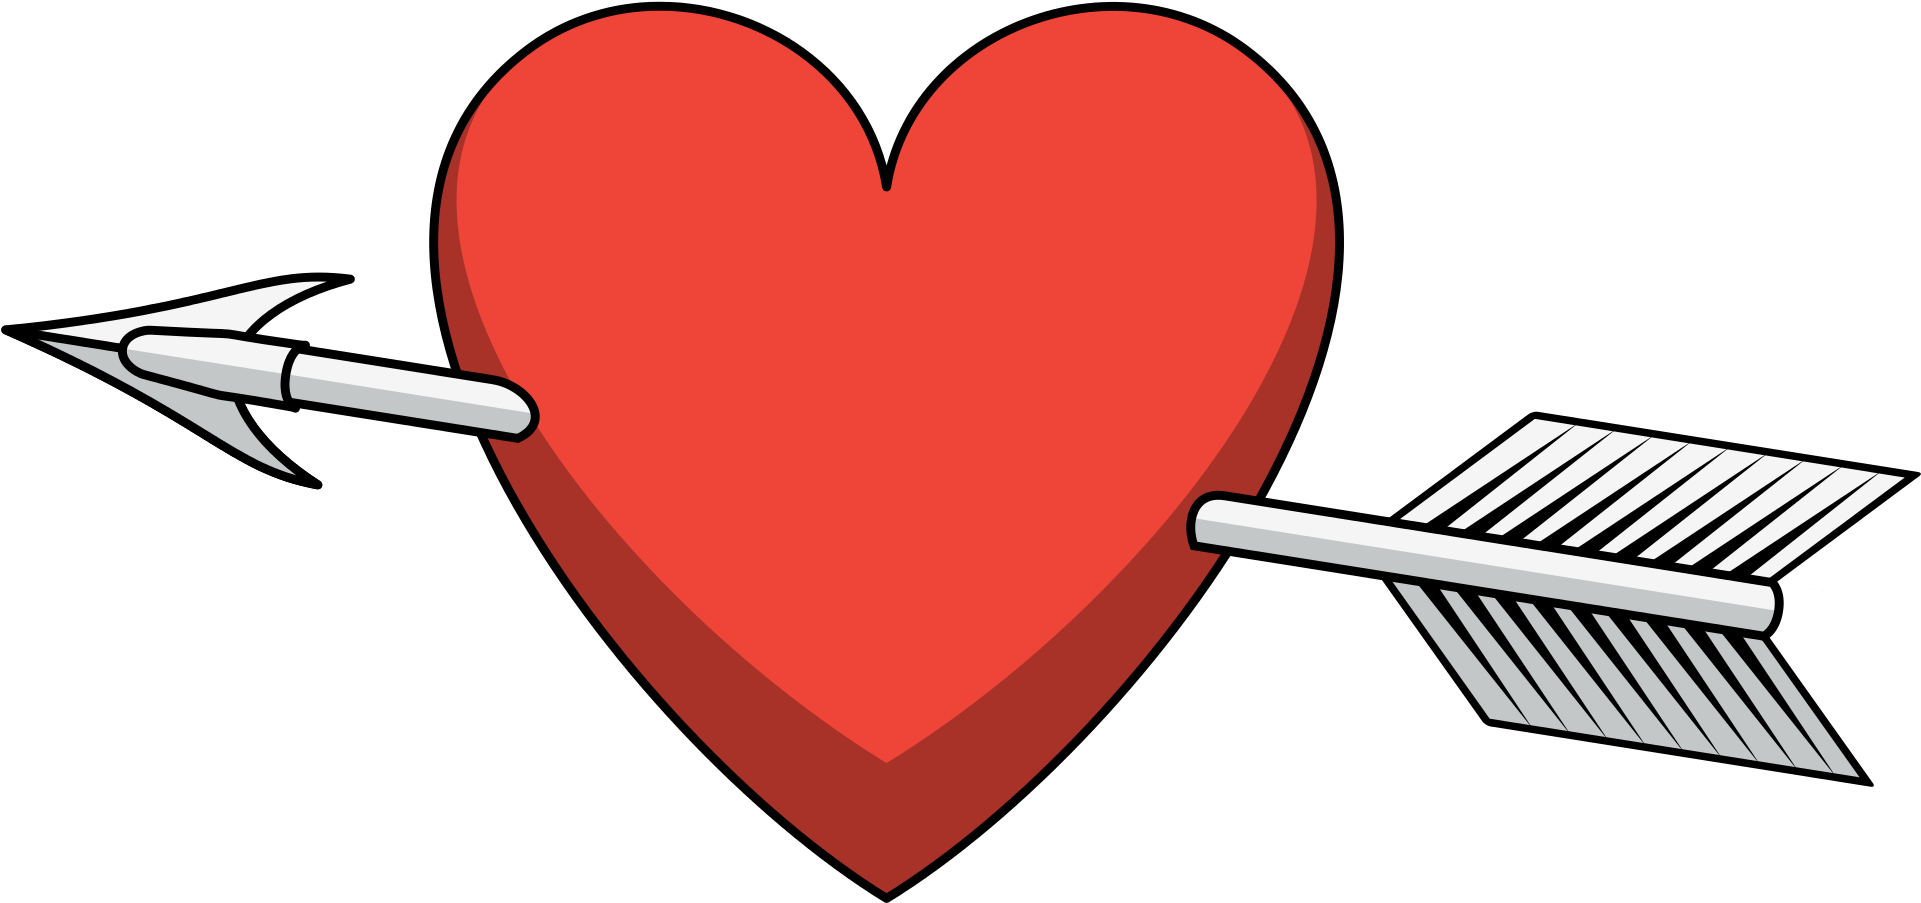 Red Heart Arrow PNG Transparent Image